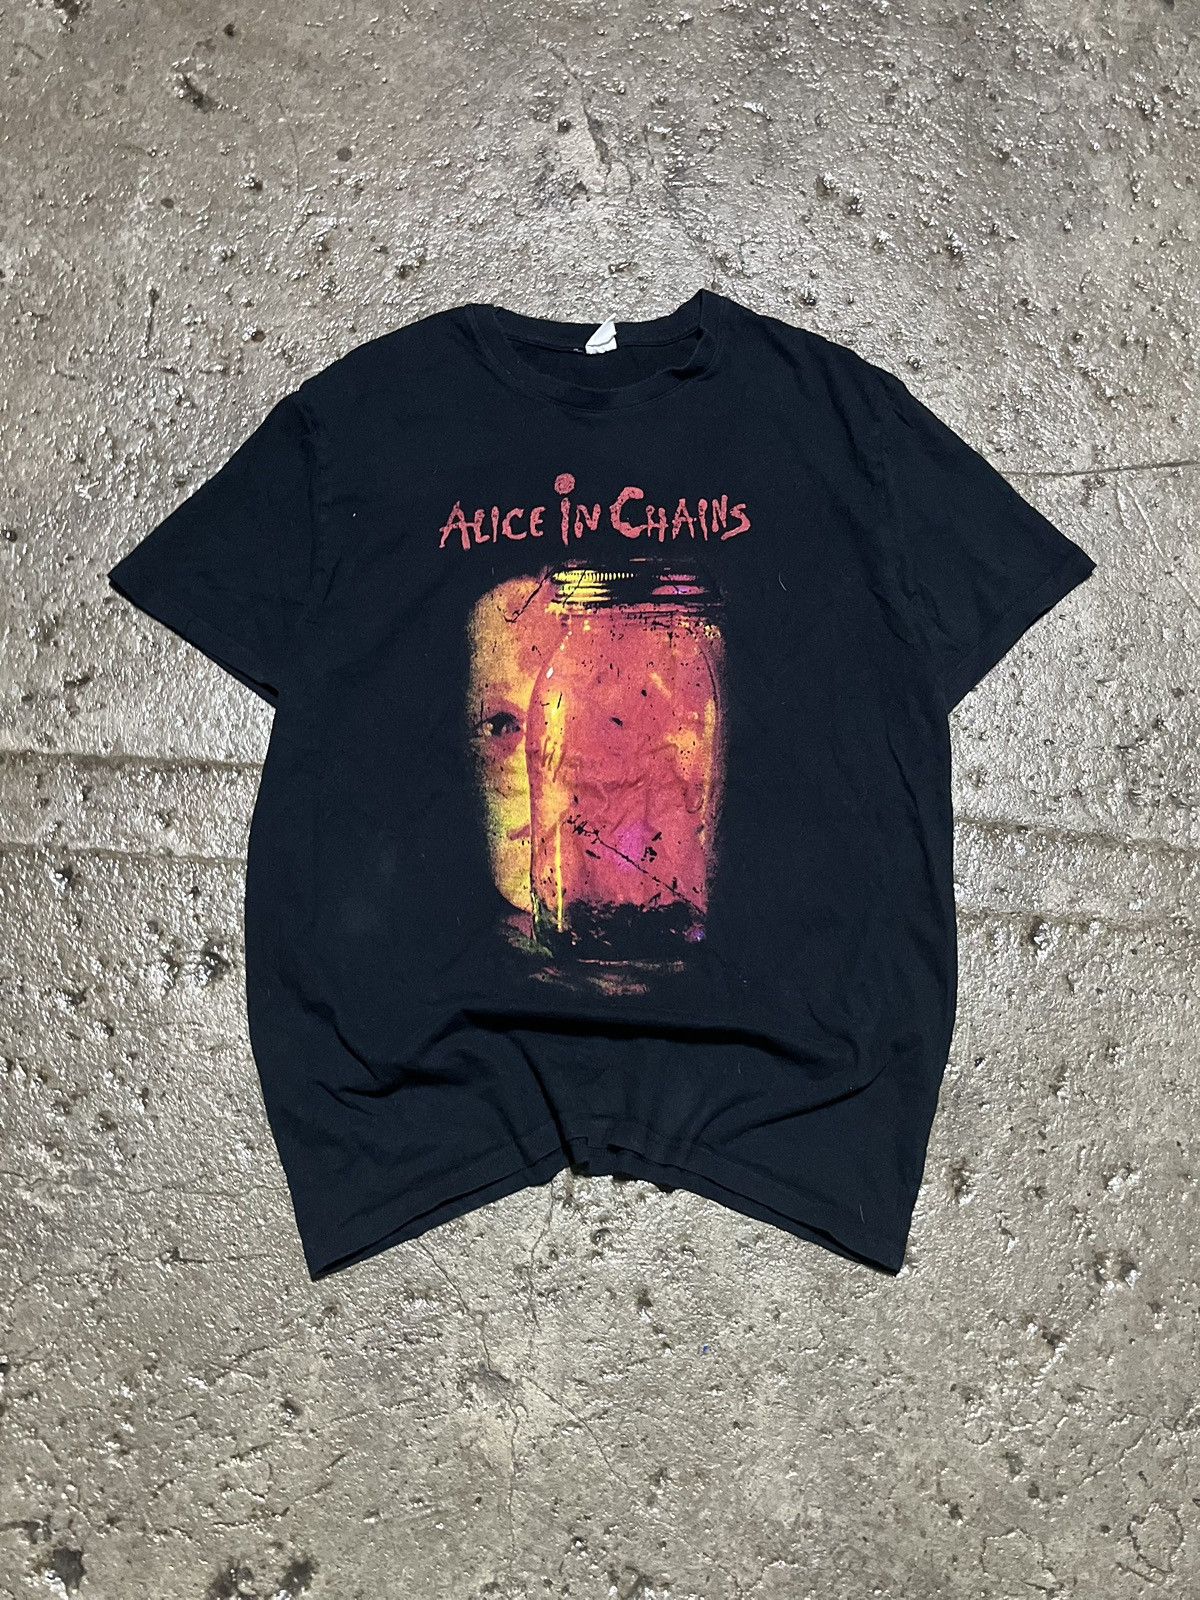 Pre-owned Band Tees X Vintage Crazy Vintage Style Alice In Chains Jar Of Flies Band Tee In Black